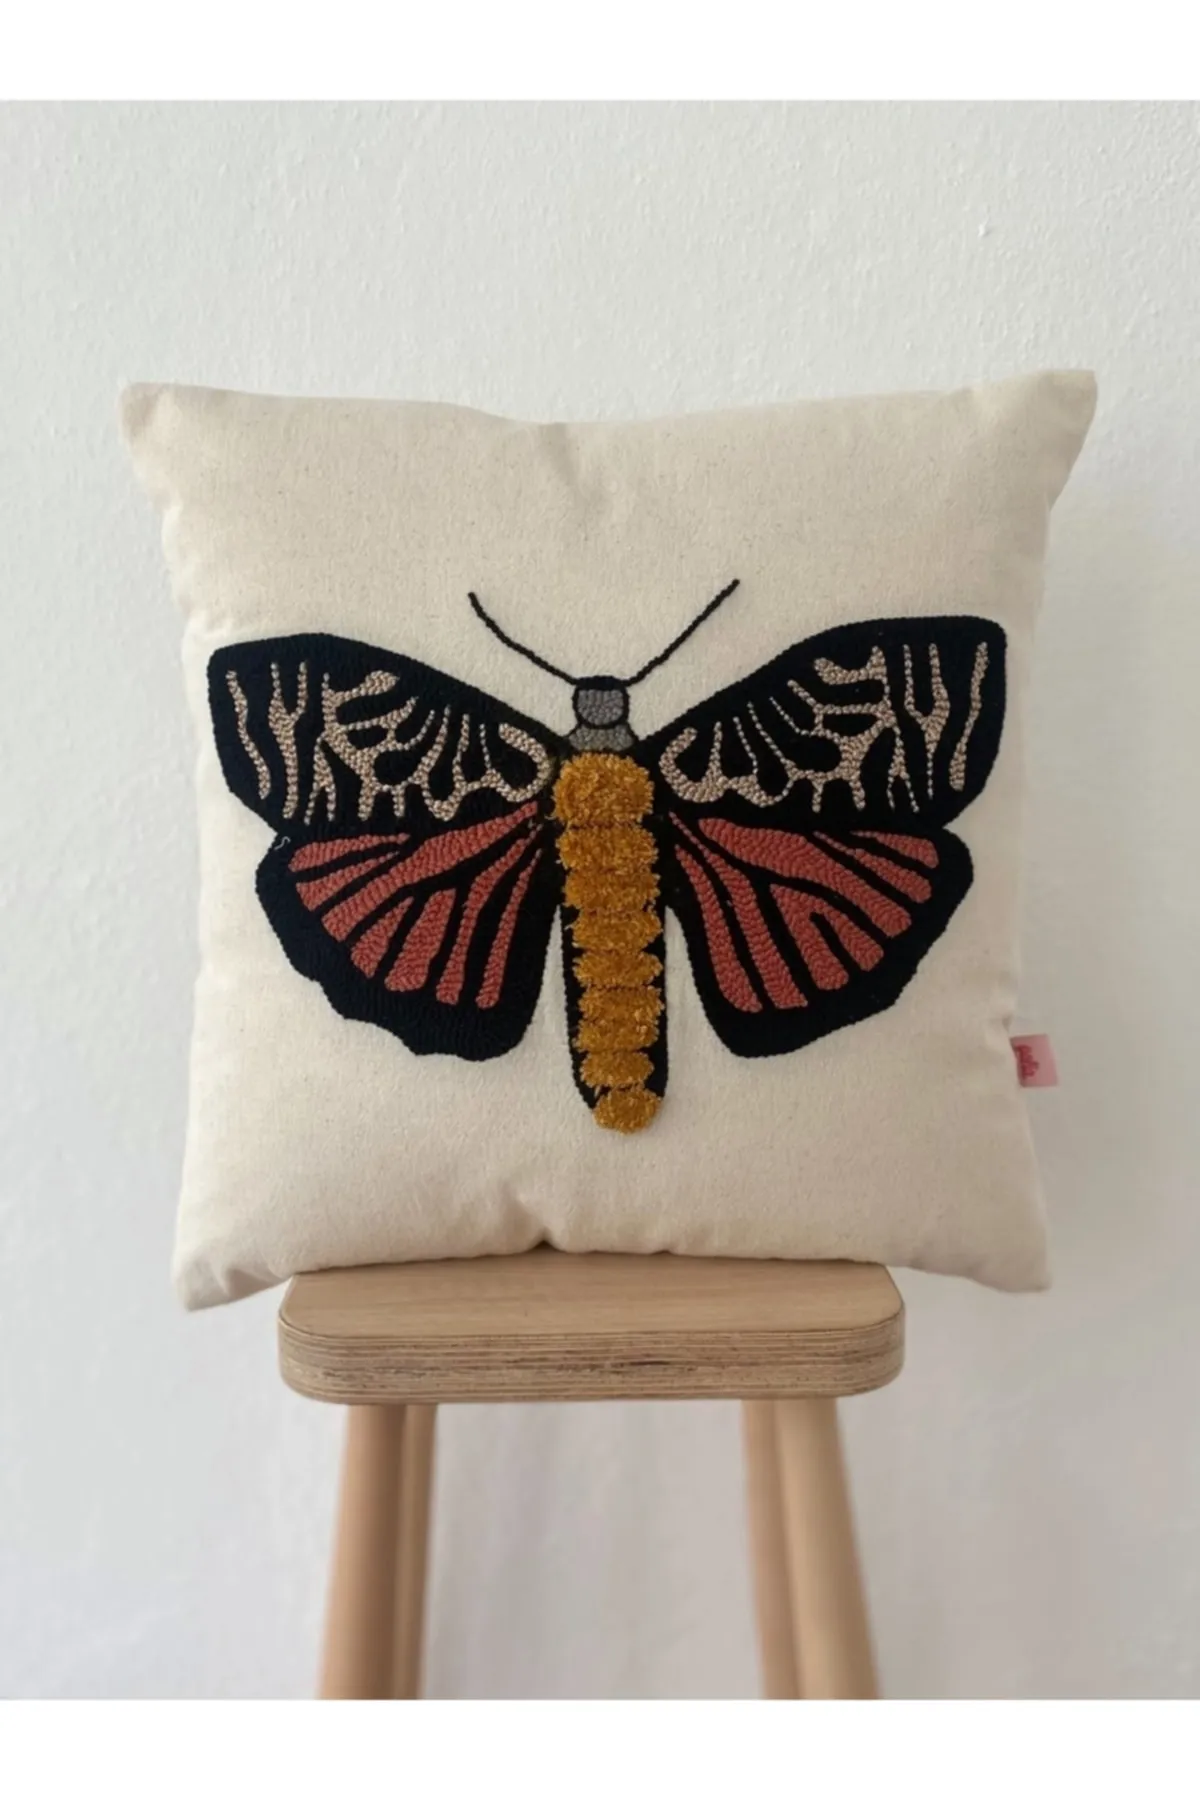 Dragonfly Butterfly Washed Linen Punch Throw Pillow Cover